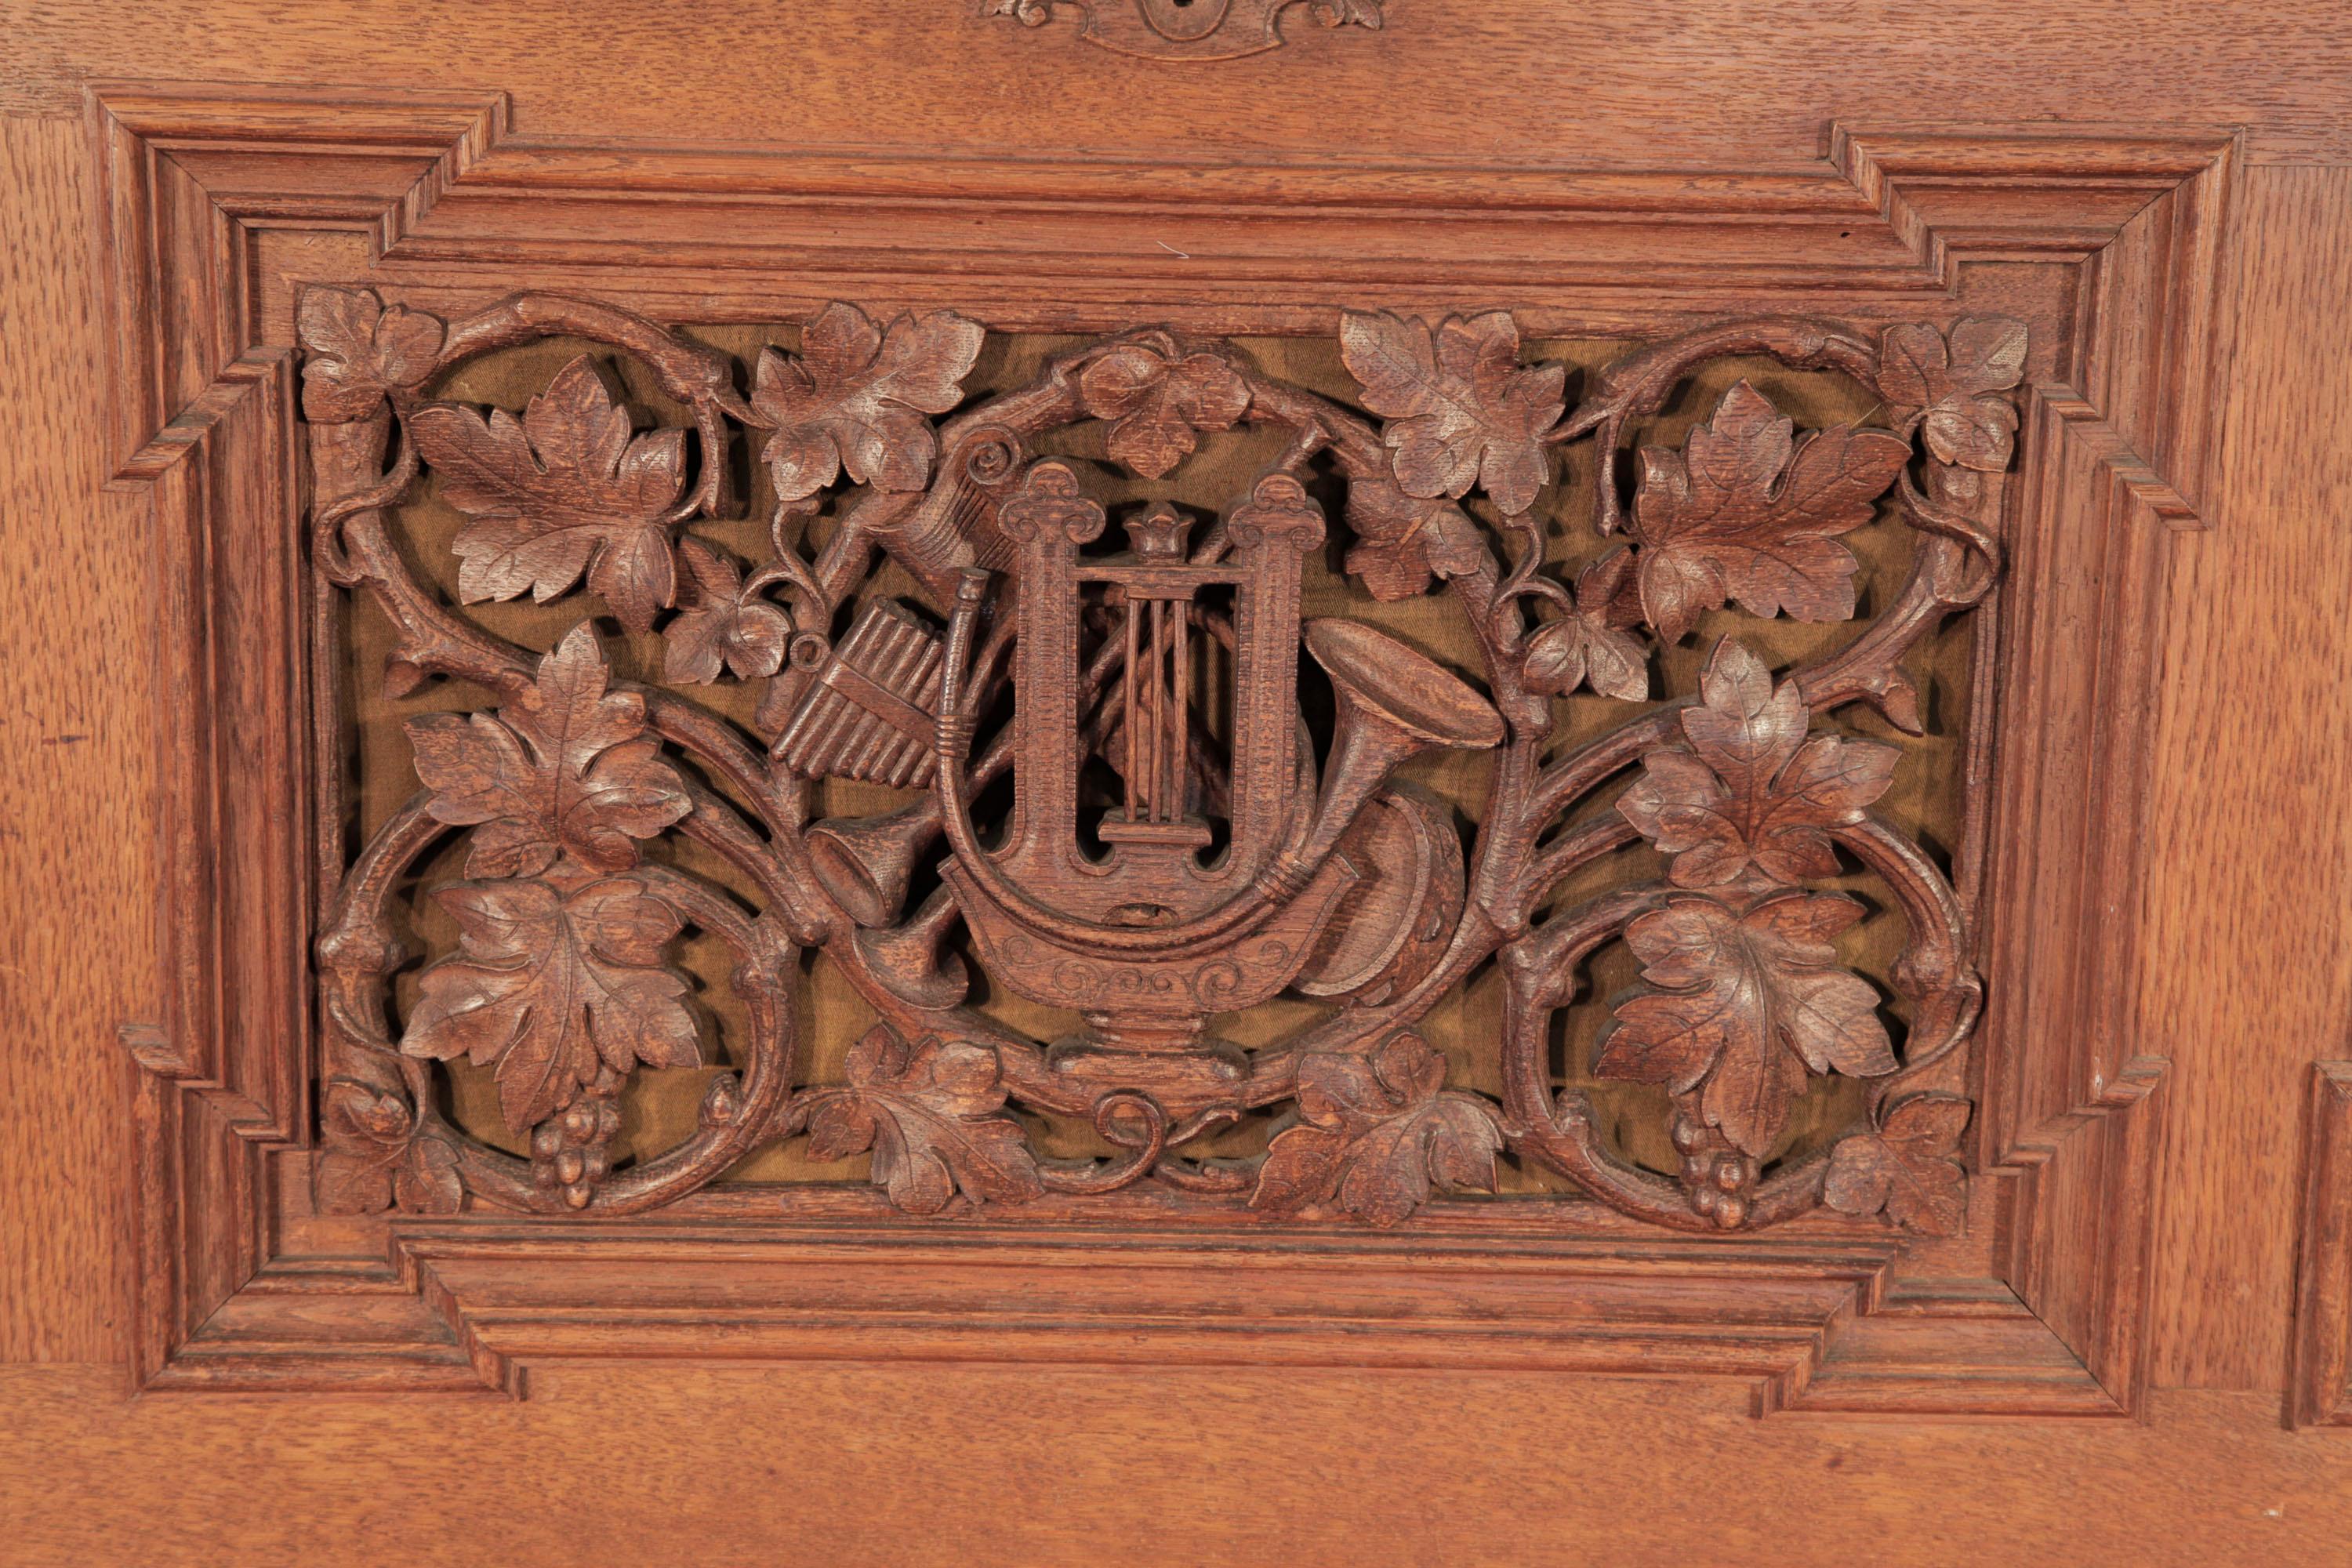 Renaissance style, 1871, Biese Hof upright piano in polished, oak with twisted, barley sugar legs. Entire cabinet features ornately carved, openwork panels in high relief featuring naturalistic depictions of intertwining vines, grapes and foliage